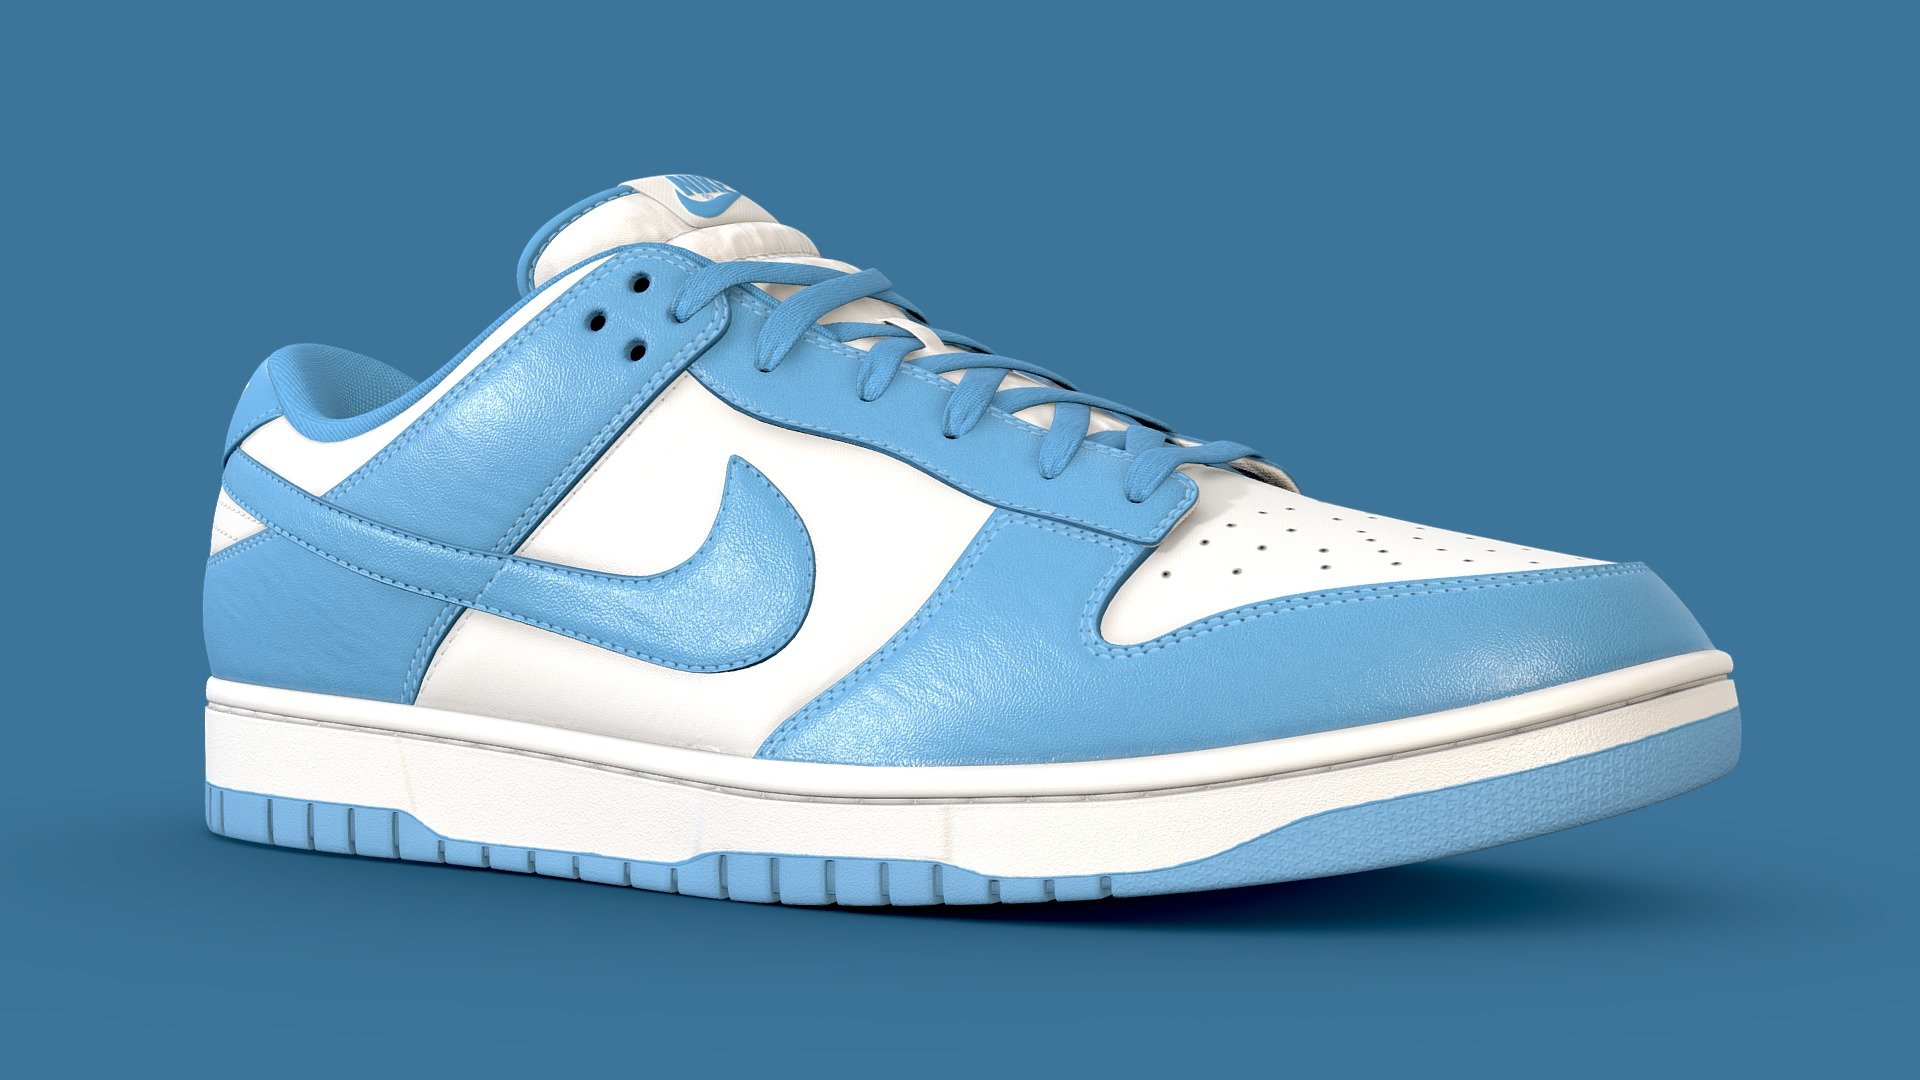 Nike Dunk Low in the UNC Colourway. Every detail was made in the recreation of this shoe, from the text on the medial side of the shoe to the subtlety of each material, nothing went overlooked. Stitches were sculpted by hand to achieve the highest quality

What's included


Blender file with linked textures
FBX and OBJ versions
OneMesh version
All 4k textures

Model Features

The upmost care went into crafting this model. As a result it is subdivision ready. The model was unwrapped with efficiency in mind. Both left and right shoes are mostly identical, save for logos and text that cannot be mirrored. As such the high detail version of the shoe uses 4 UV maps to cover both of the shoes, with the One mesh version using just the one UV map 3d model